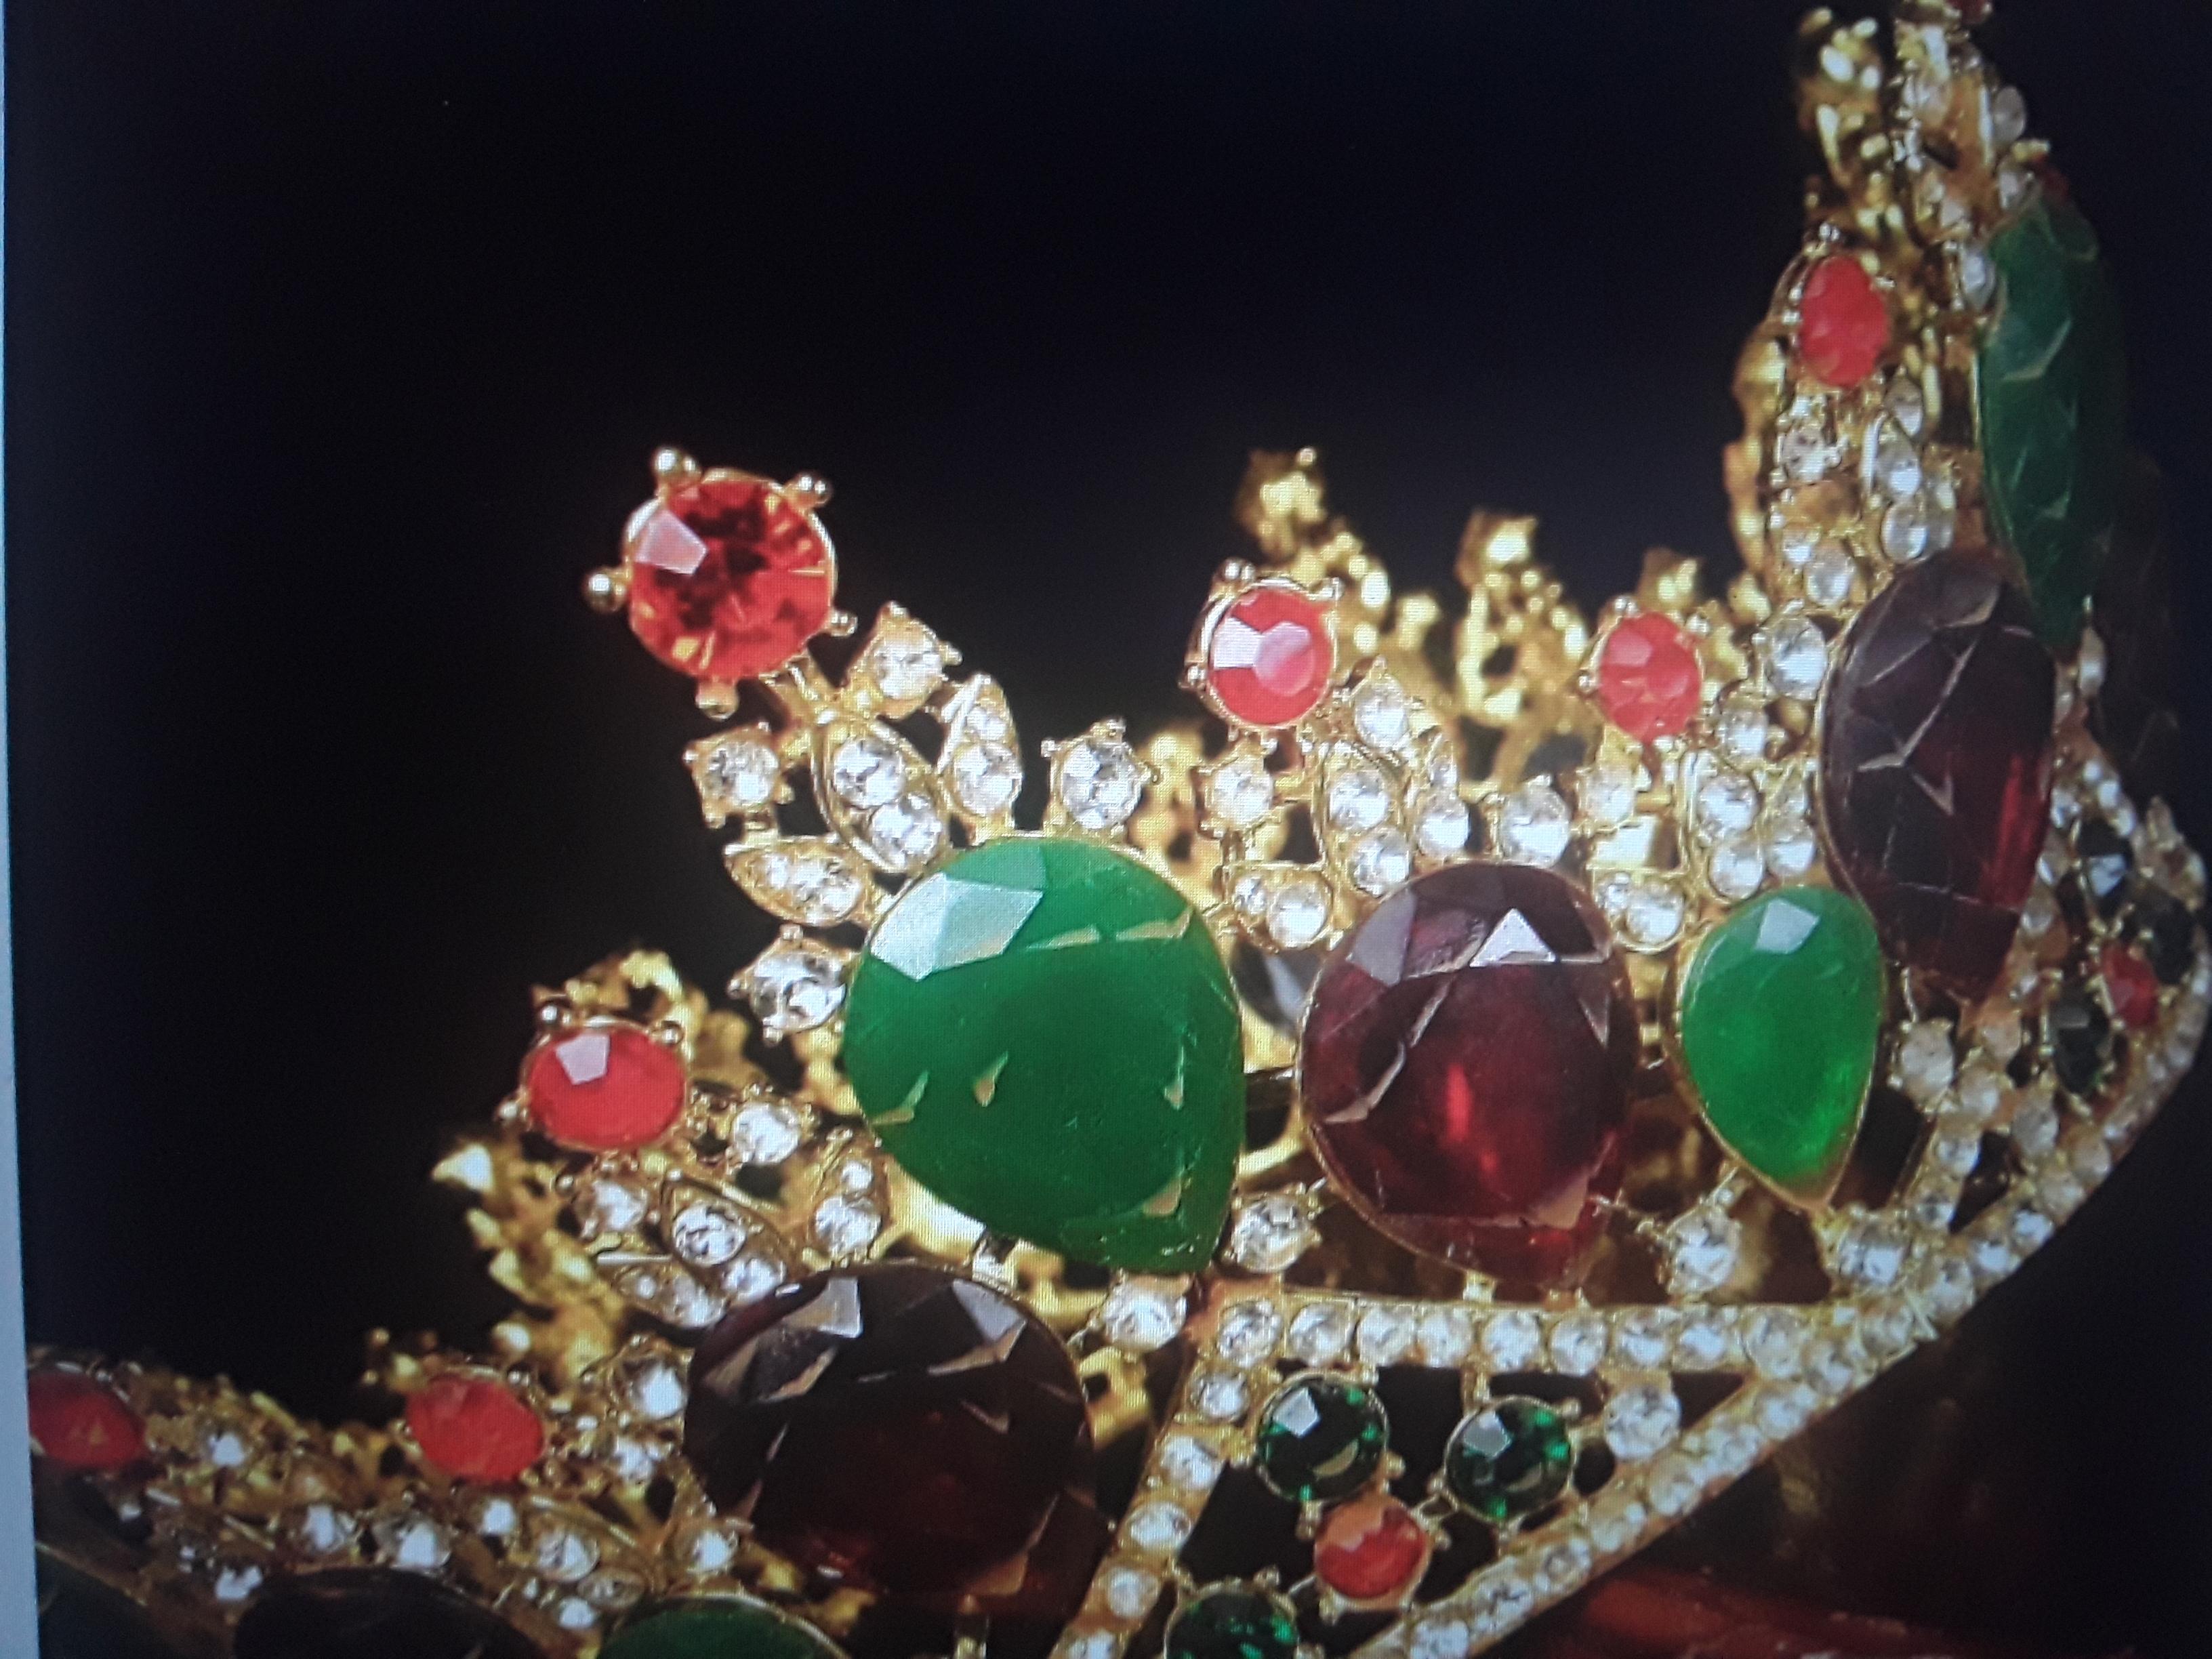 Antique Gilt Bronze with Green and Red Jewelled Royal Tiara. Jewel encrusted. British history. c1900. Very interesting piece that I had to have.